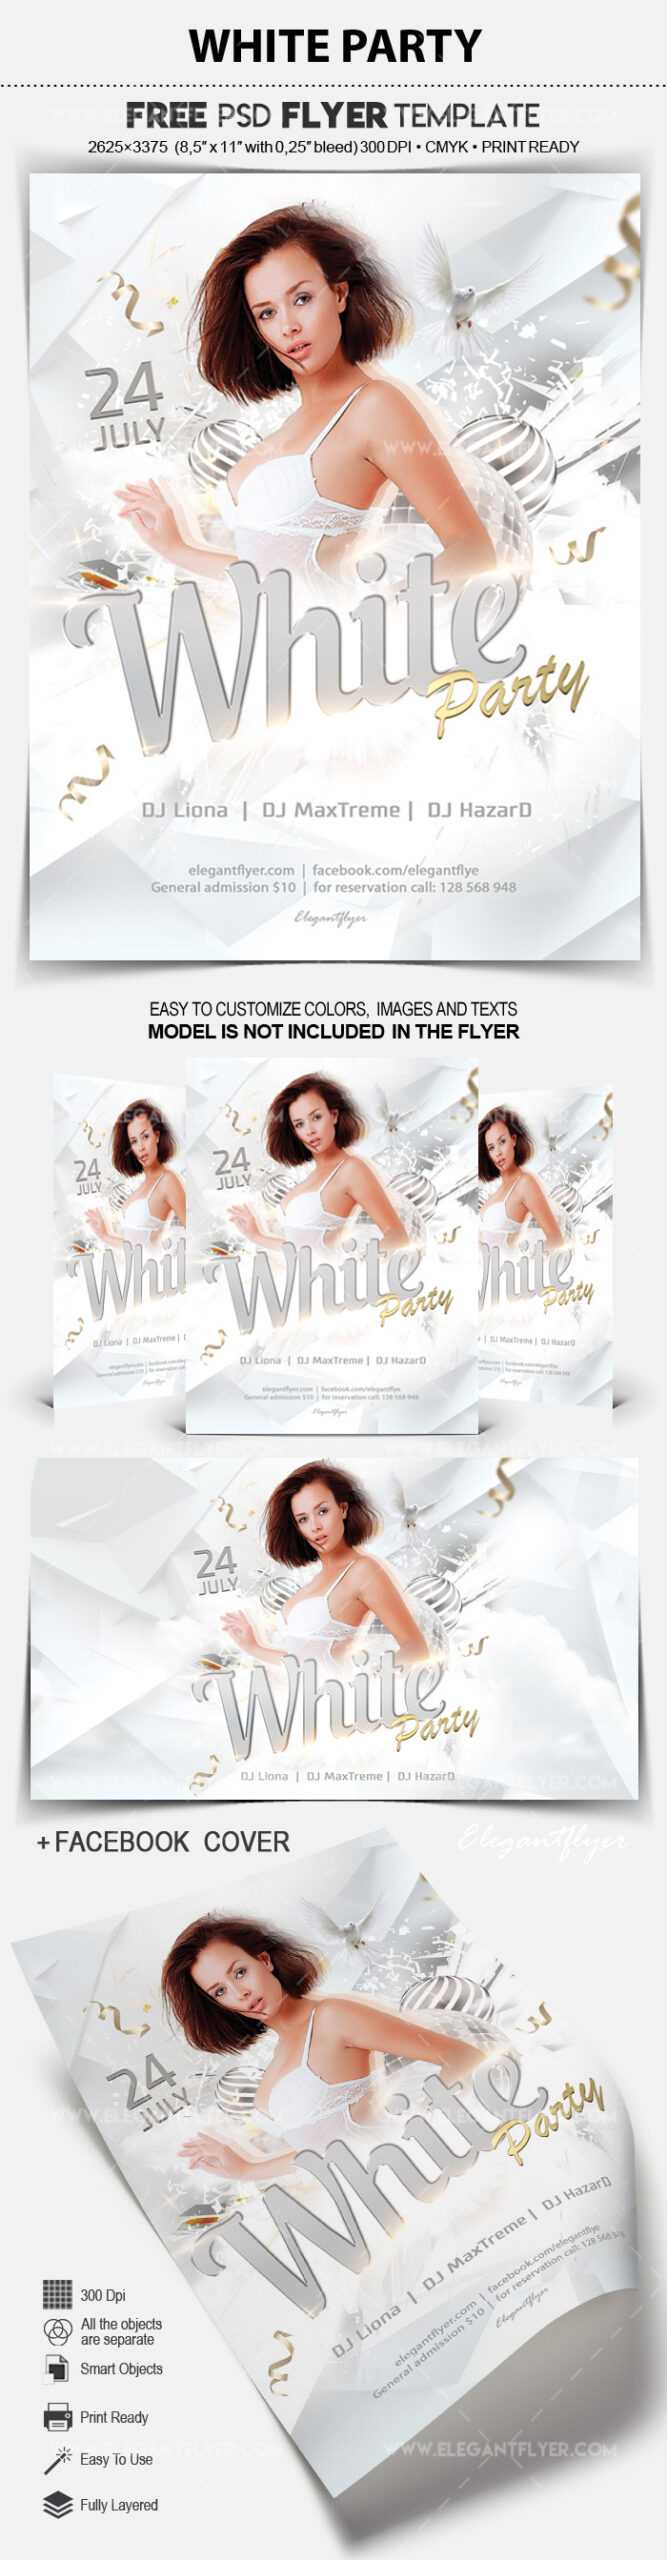 White Party – Free Flyer Psd Template Within Free All White Party Flyer Template